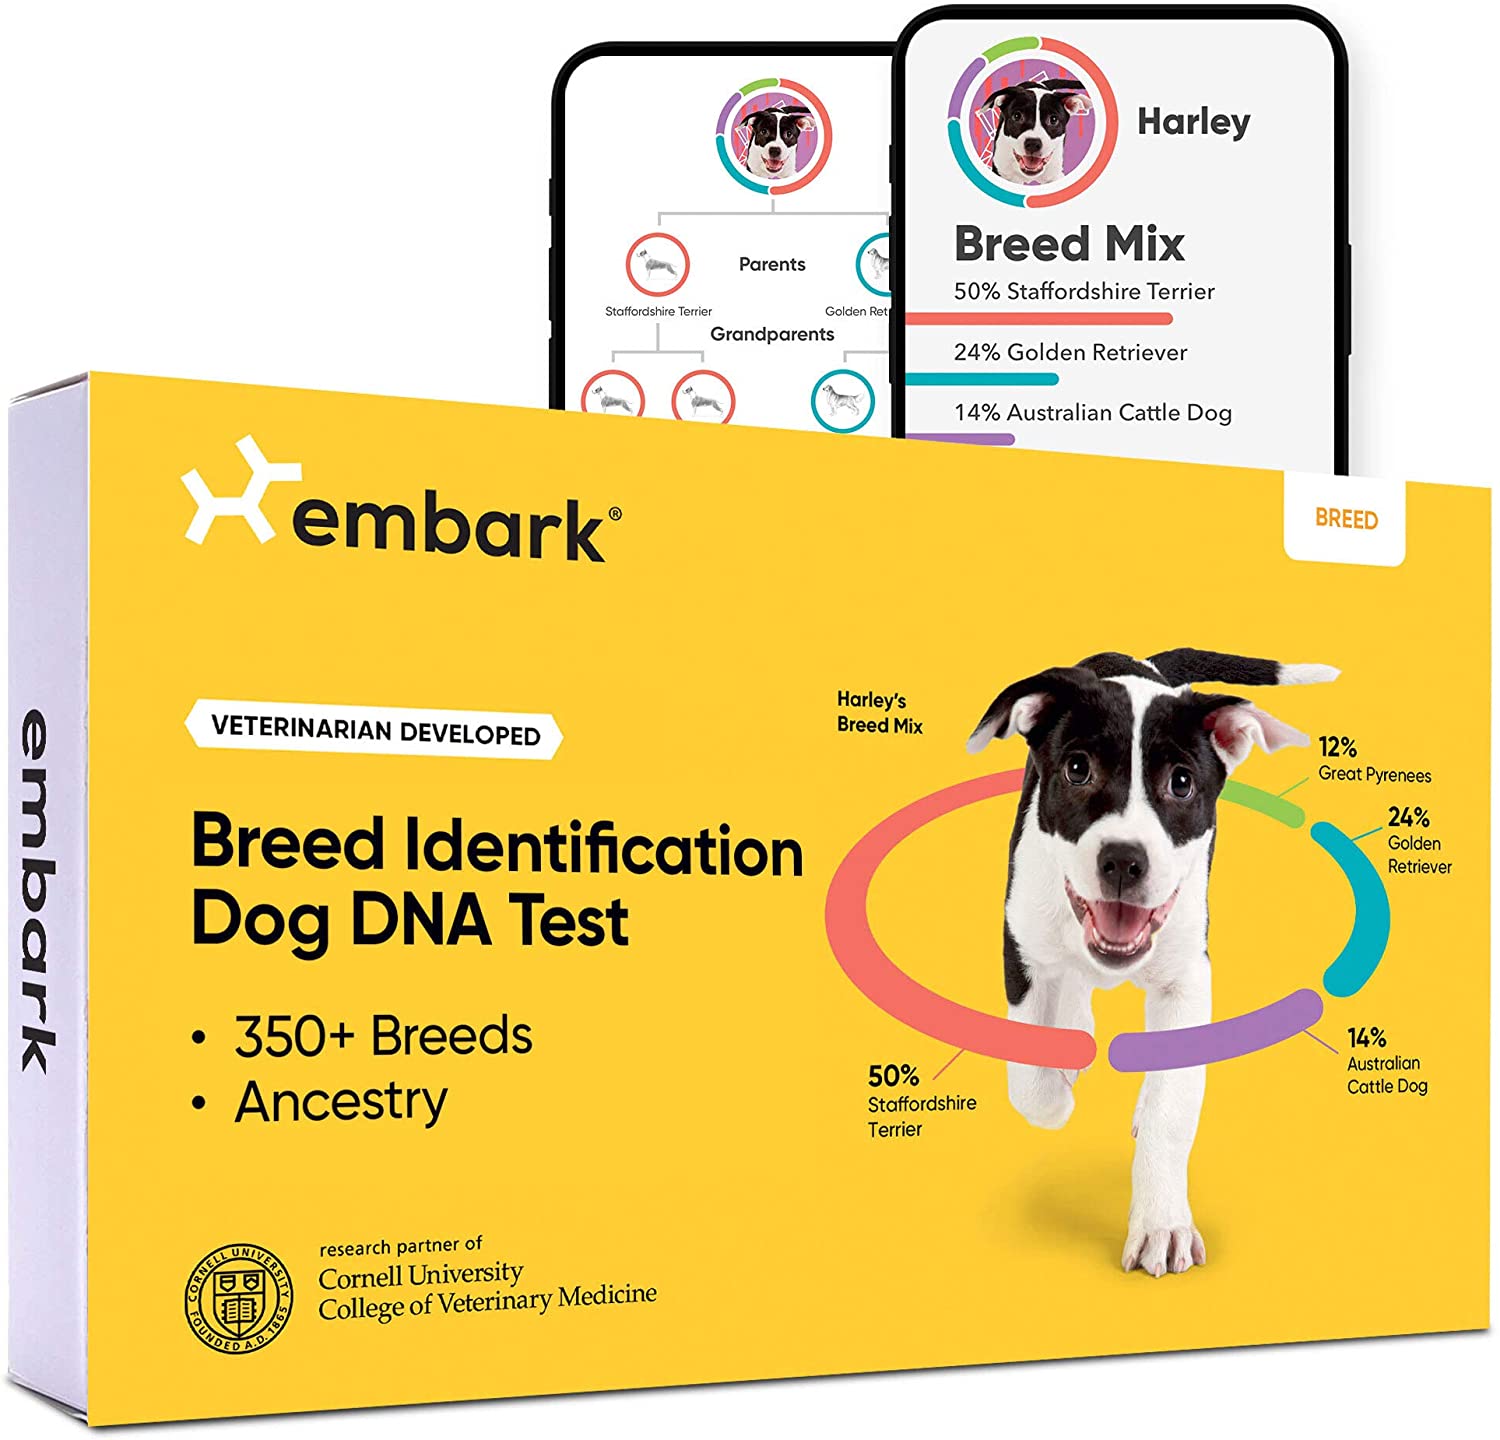 DNA Test Kits For Dogs - Buying Guide - Embark Breed Identification